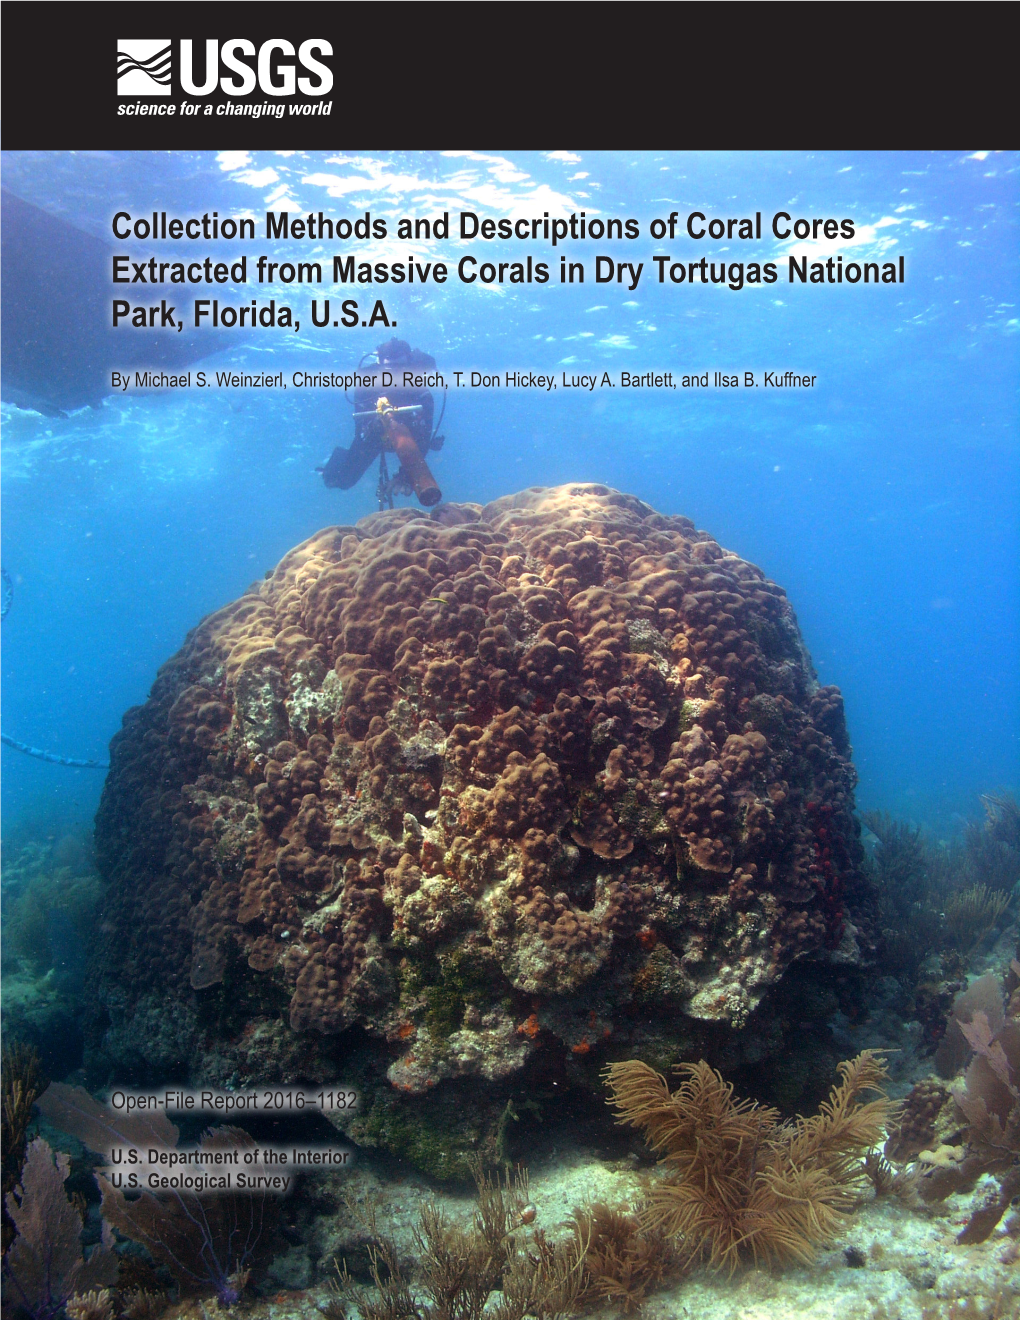 Collection Methods and Descriptions of Coral Cores Extracted from Massive Corals in Dry Tortugas National Park, Florida, U.S.A